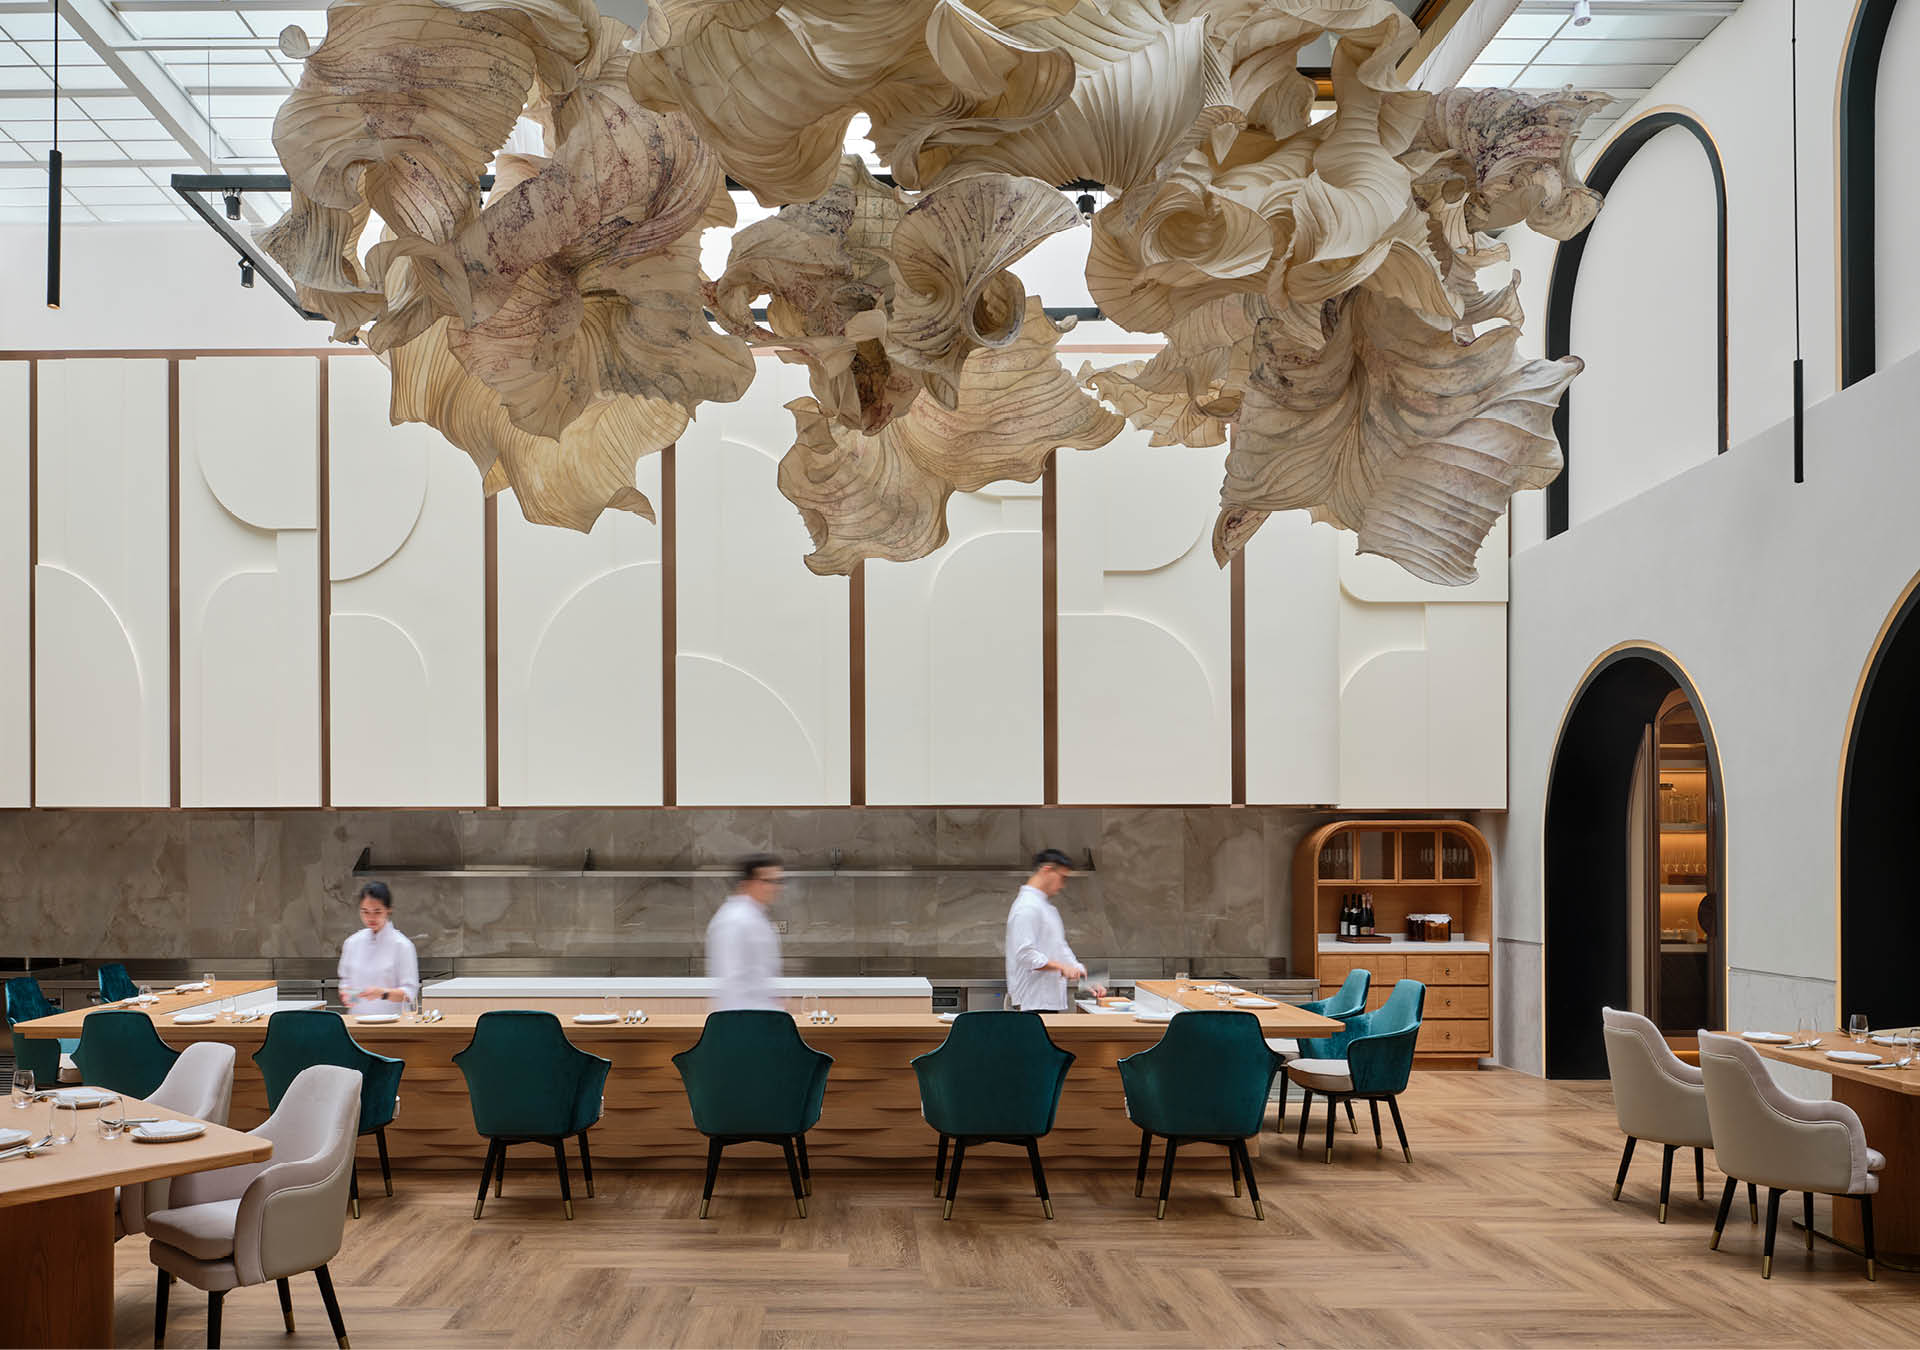 A ceiling display hanging over tables and chairs at Born restaurant, Singapore.